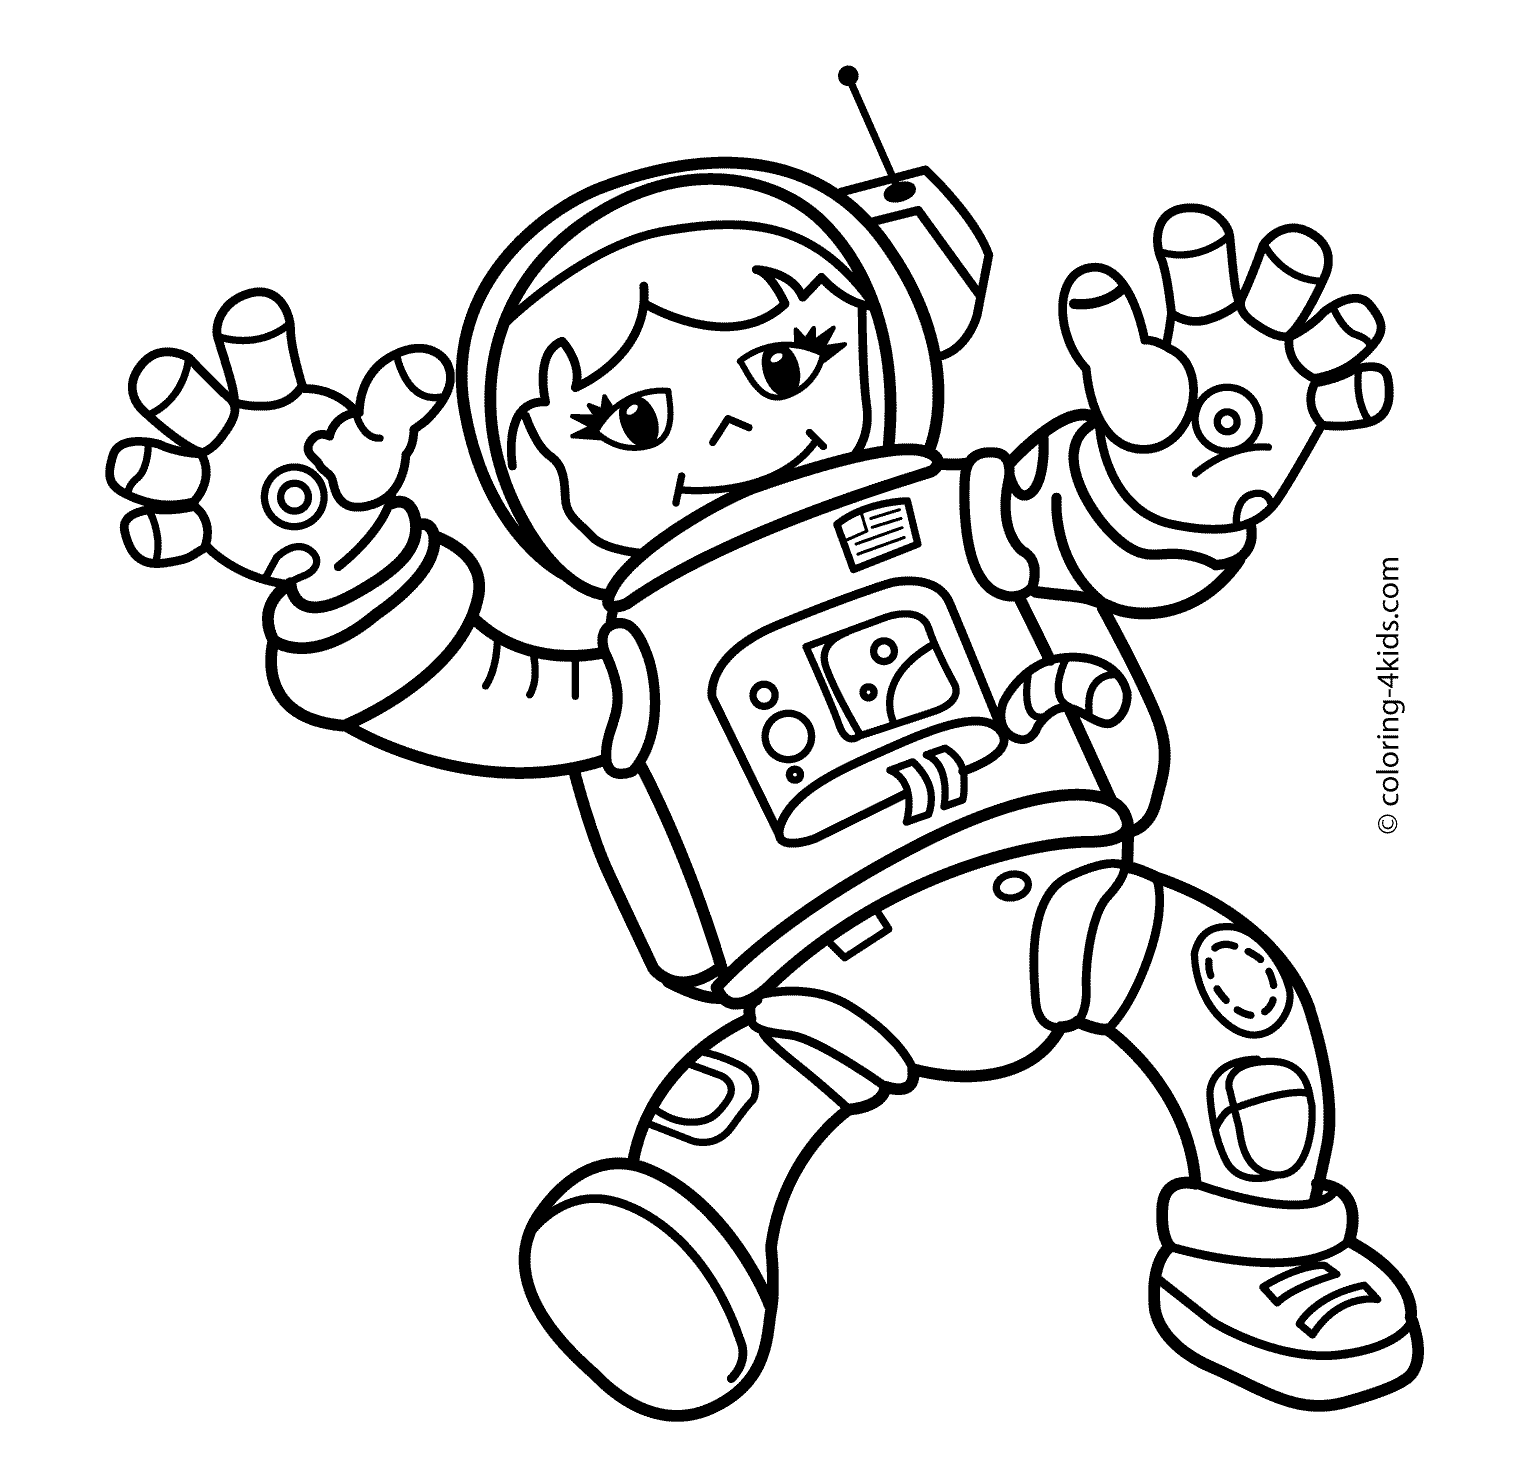 Download 12 coloring pictures astronaut - Print Color Craft